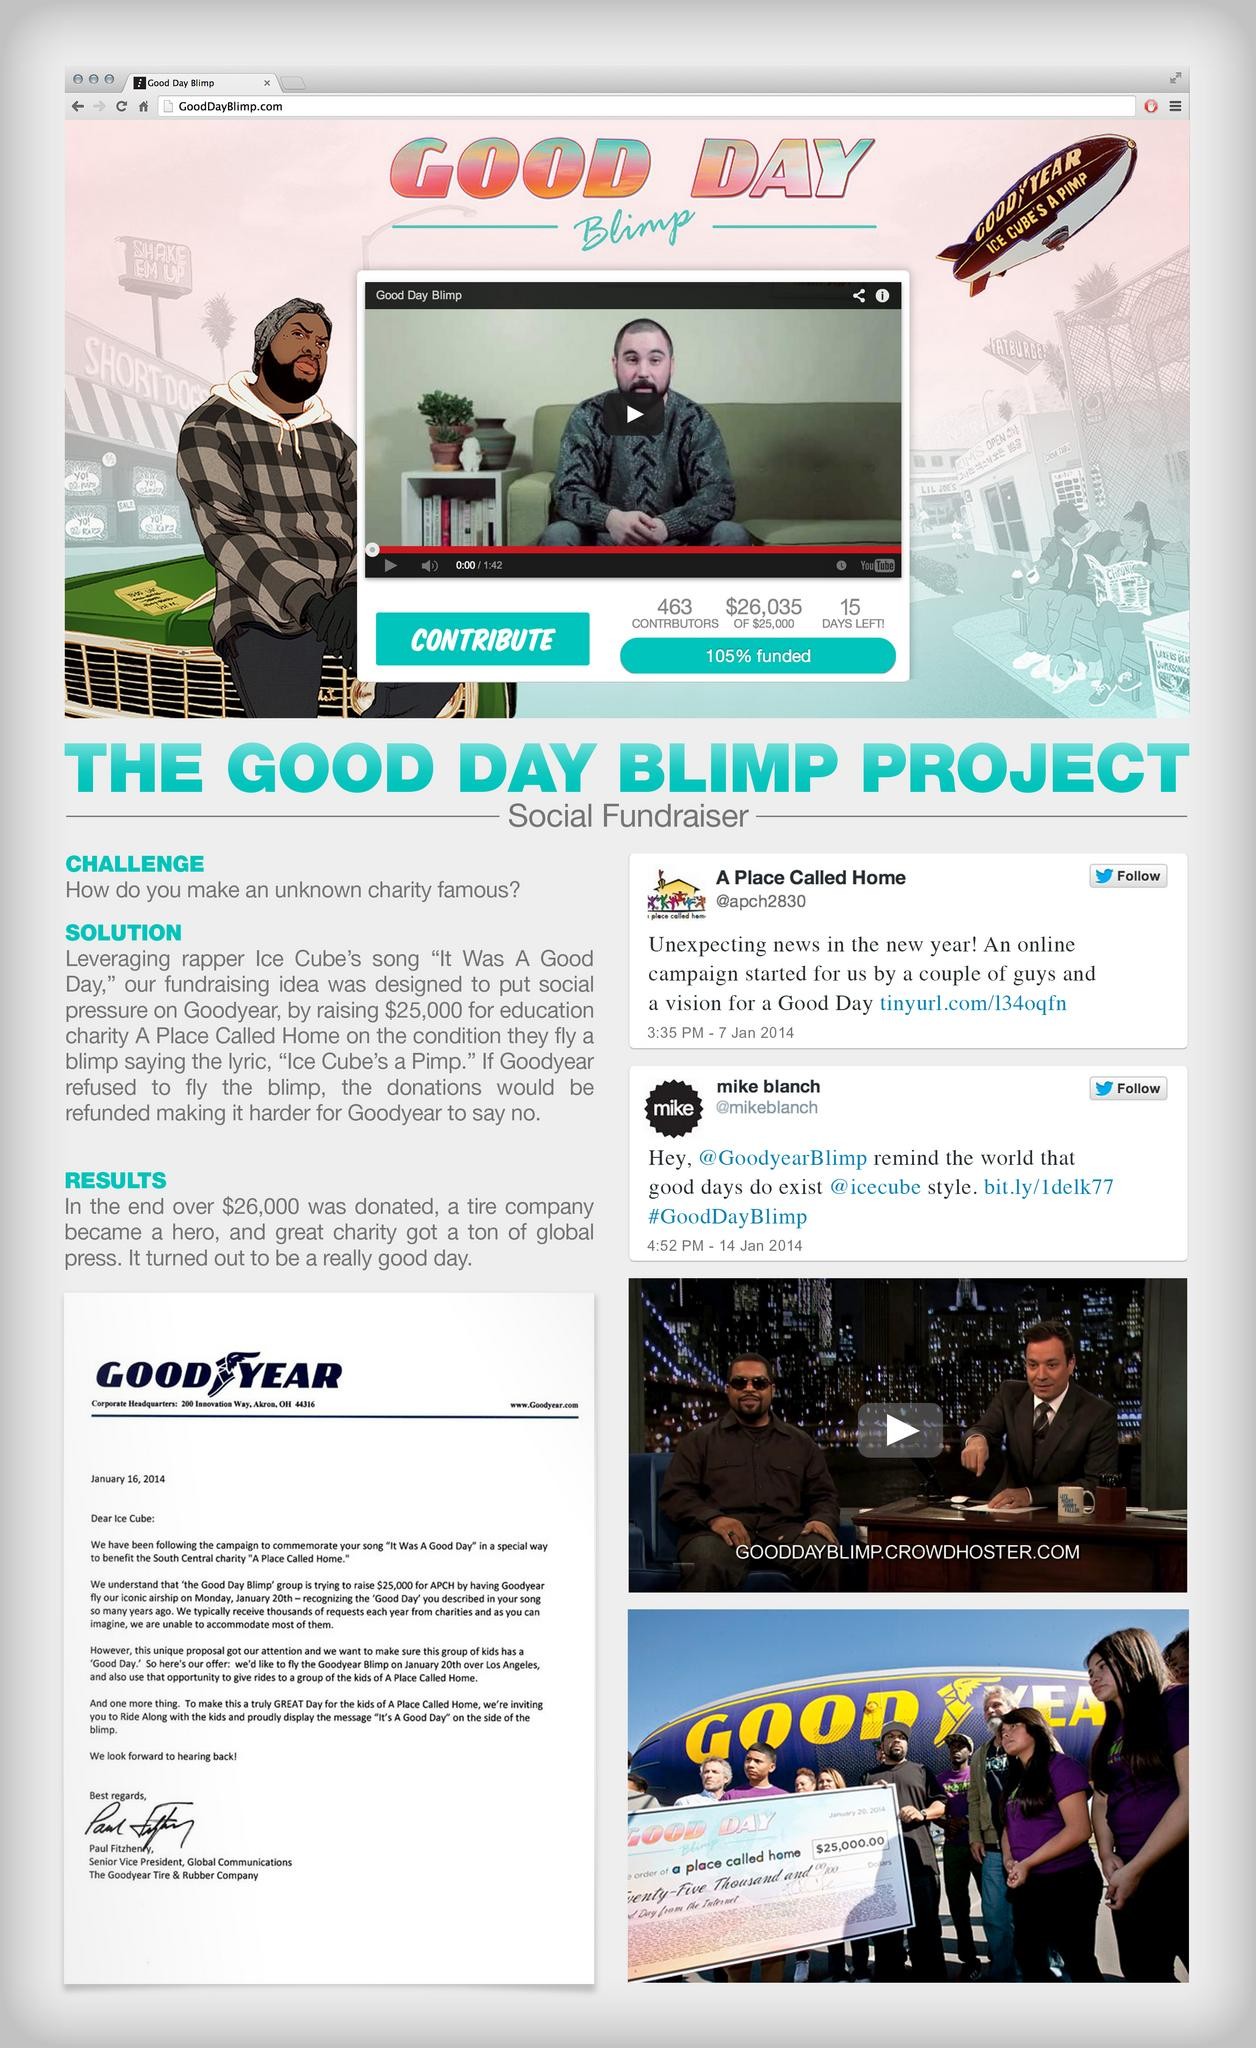 GOOD DAY BLIMP PROJECT